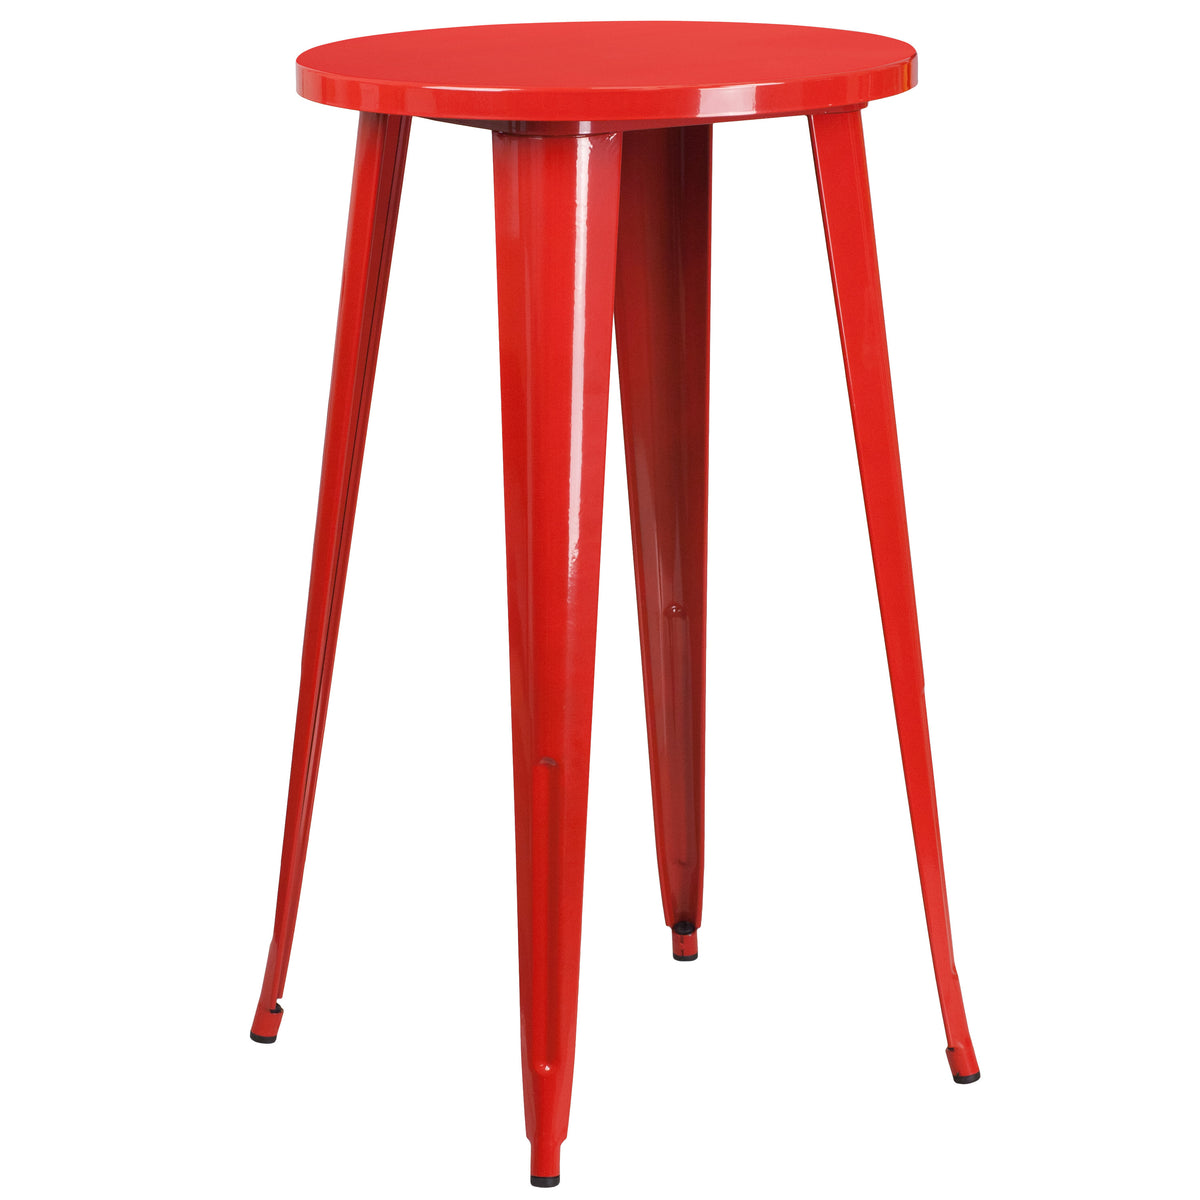 Red |#| 24inch Round Red Metal Indoor-Outdoor Bar Table Set with 4 Cafe Stools